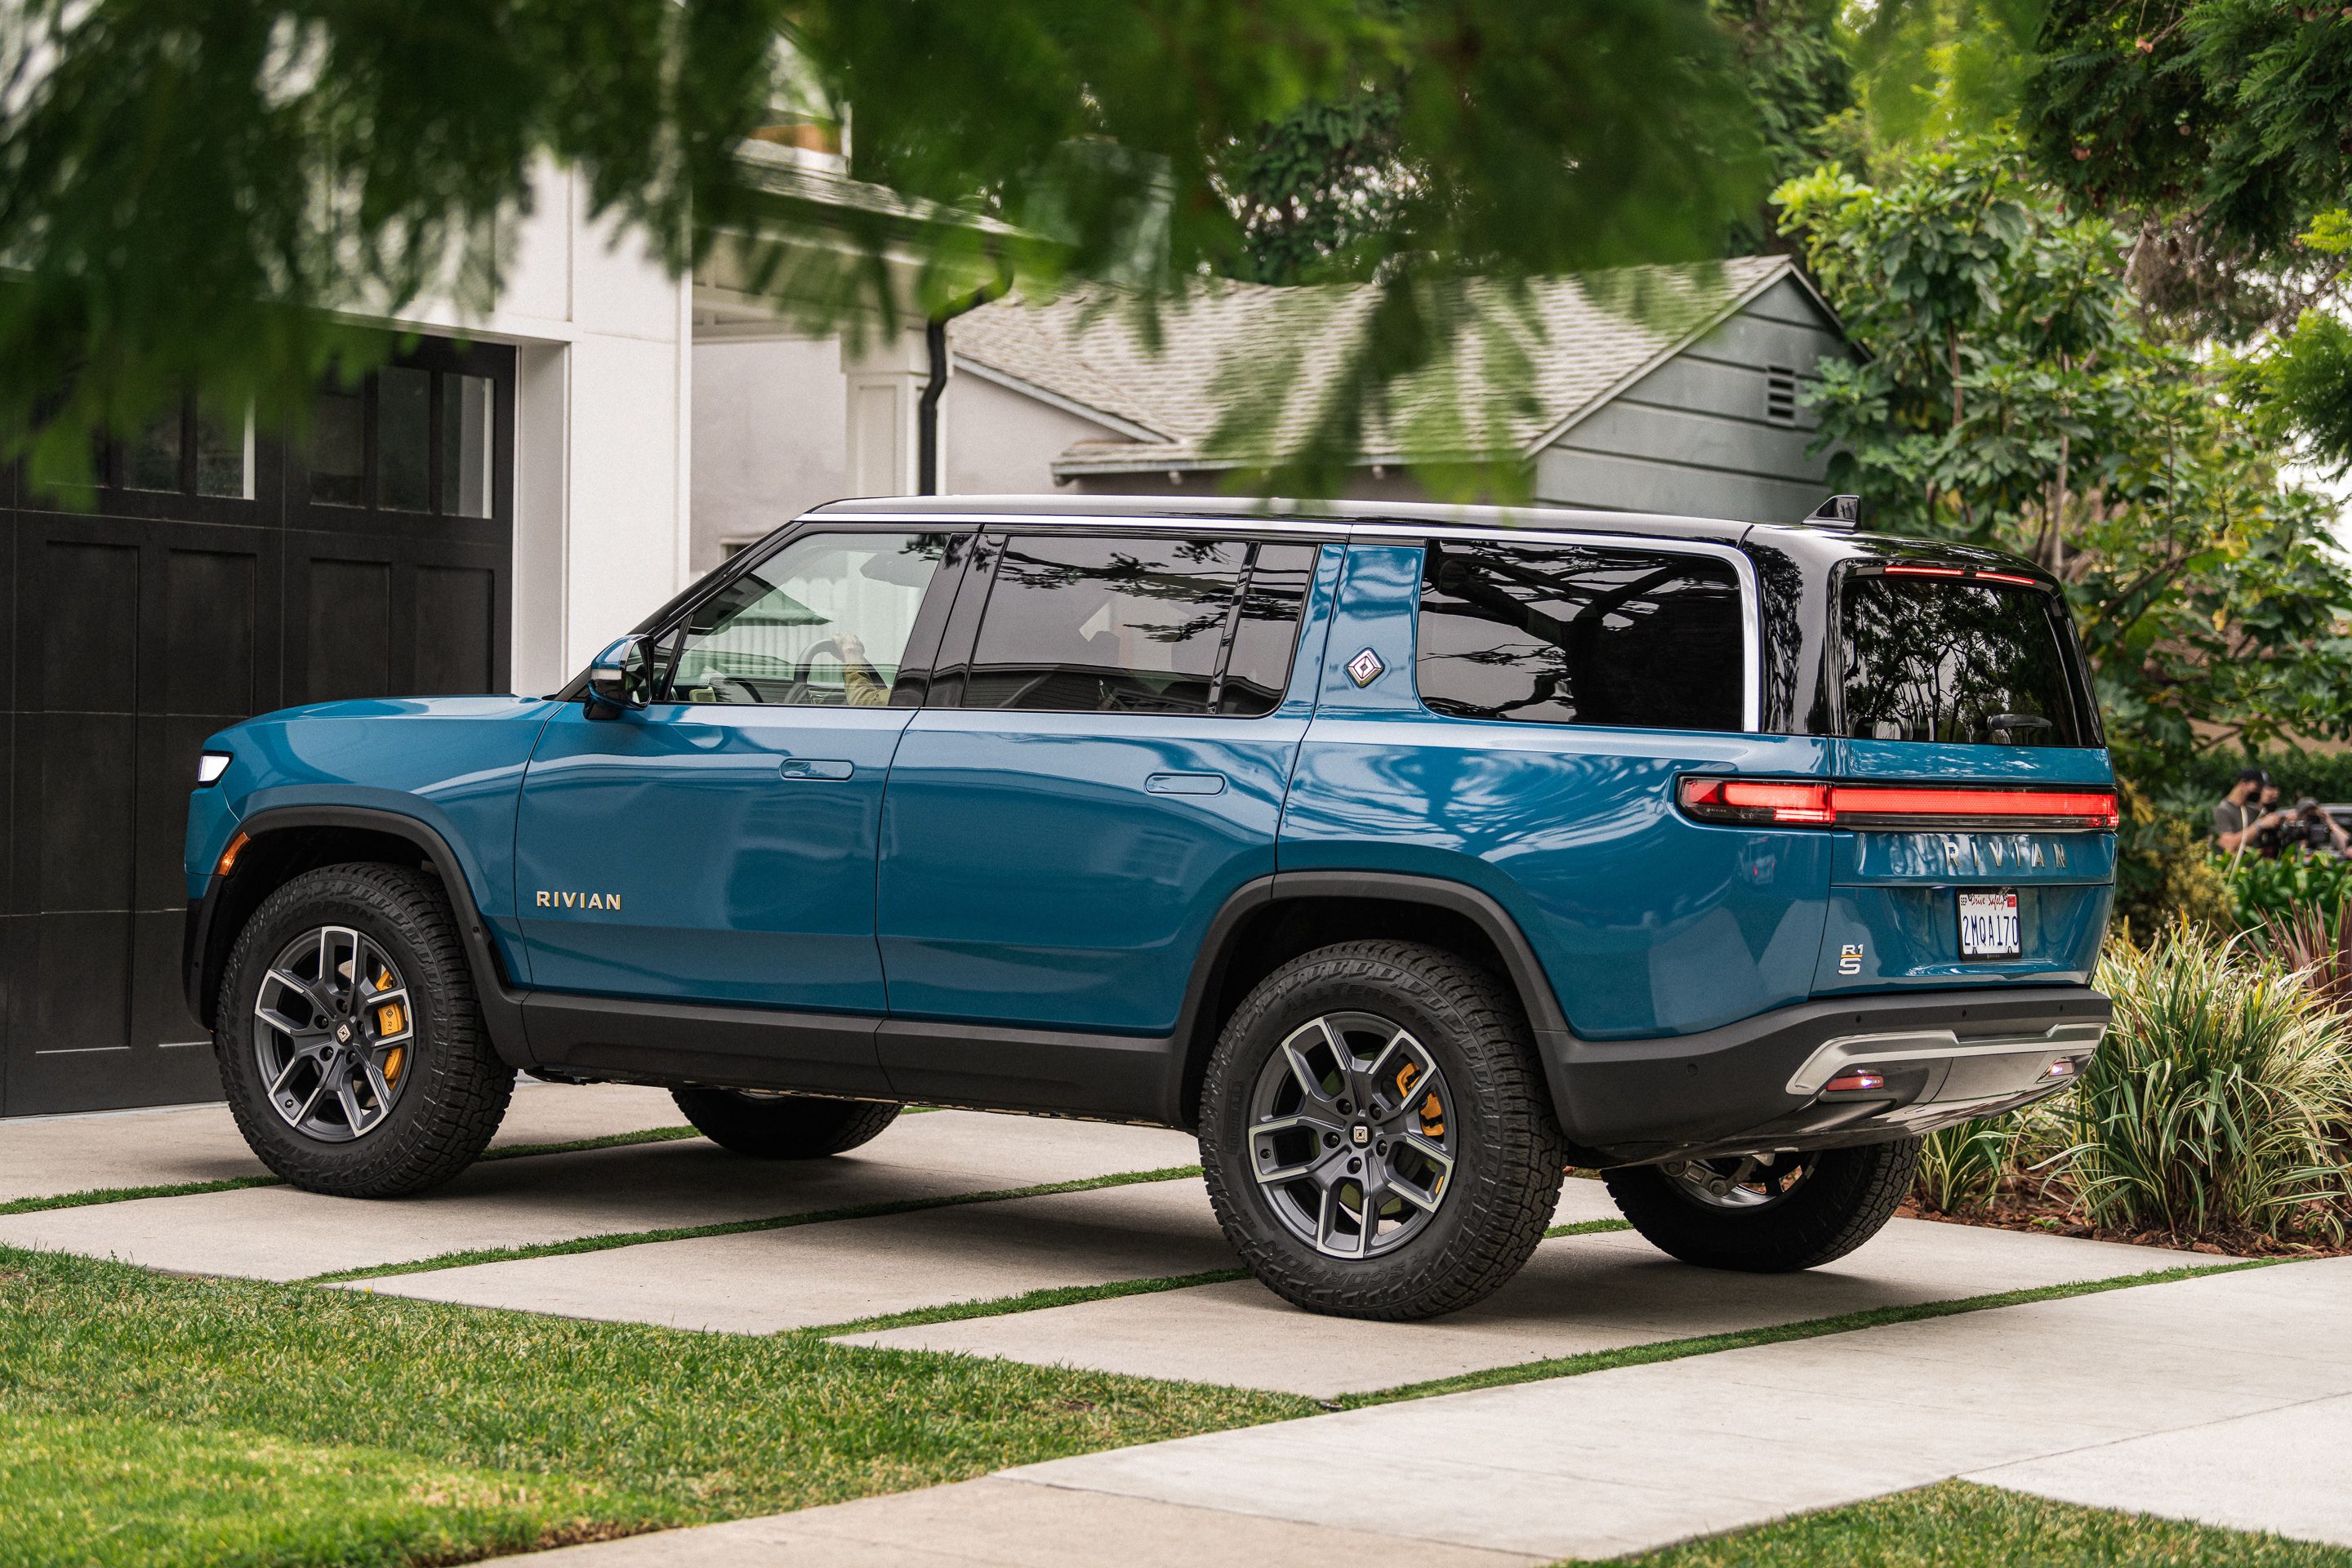 Blue 2022 Rivian R1S parked in a driveway